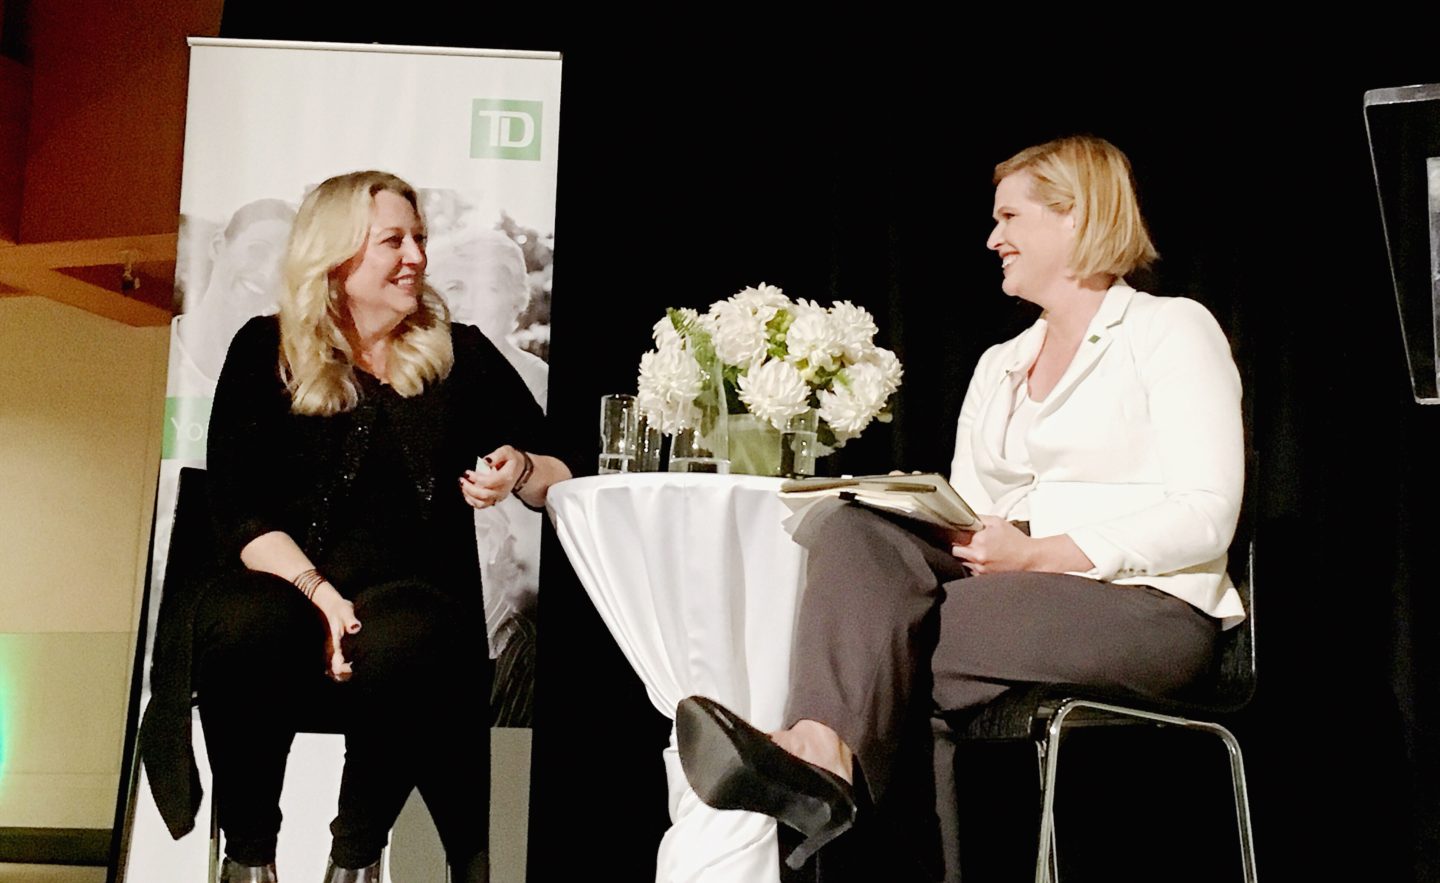 Your Story Your Future TD Speakers Series with Cheryl Strayed